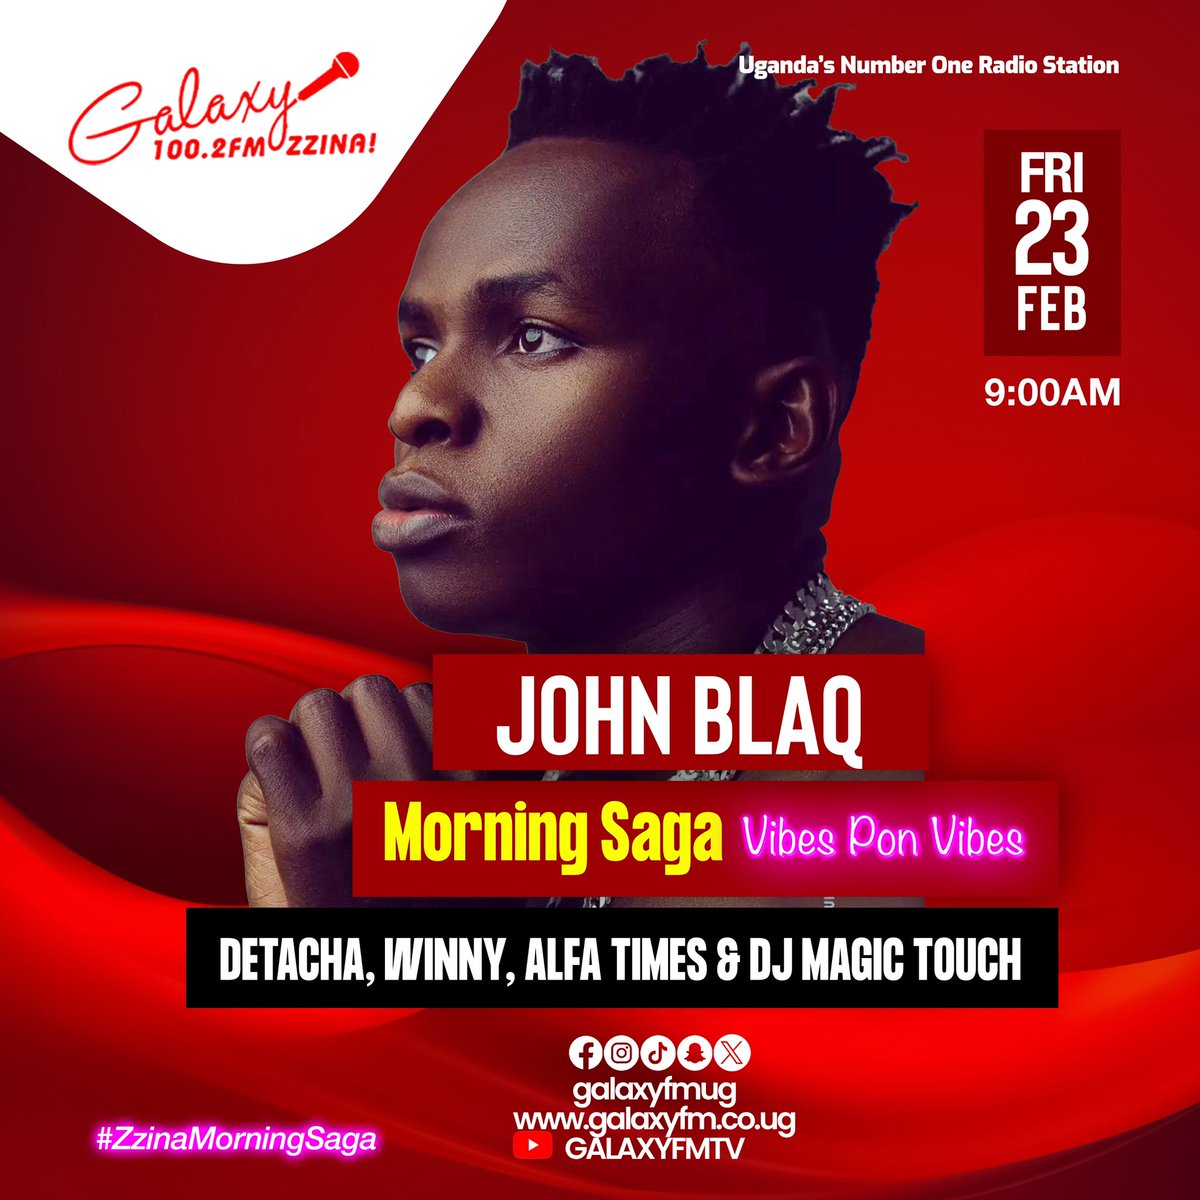 Mr Ayabas @JohnBlaqMusic will be joining us this Friday on the #ZzinaMorningSaga Make a date with us at 9:00 AM